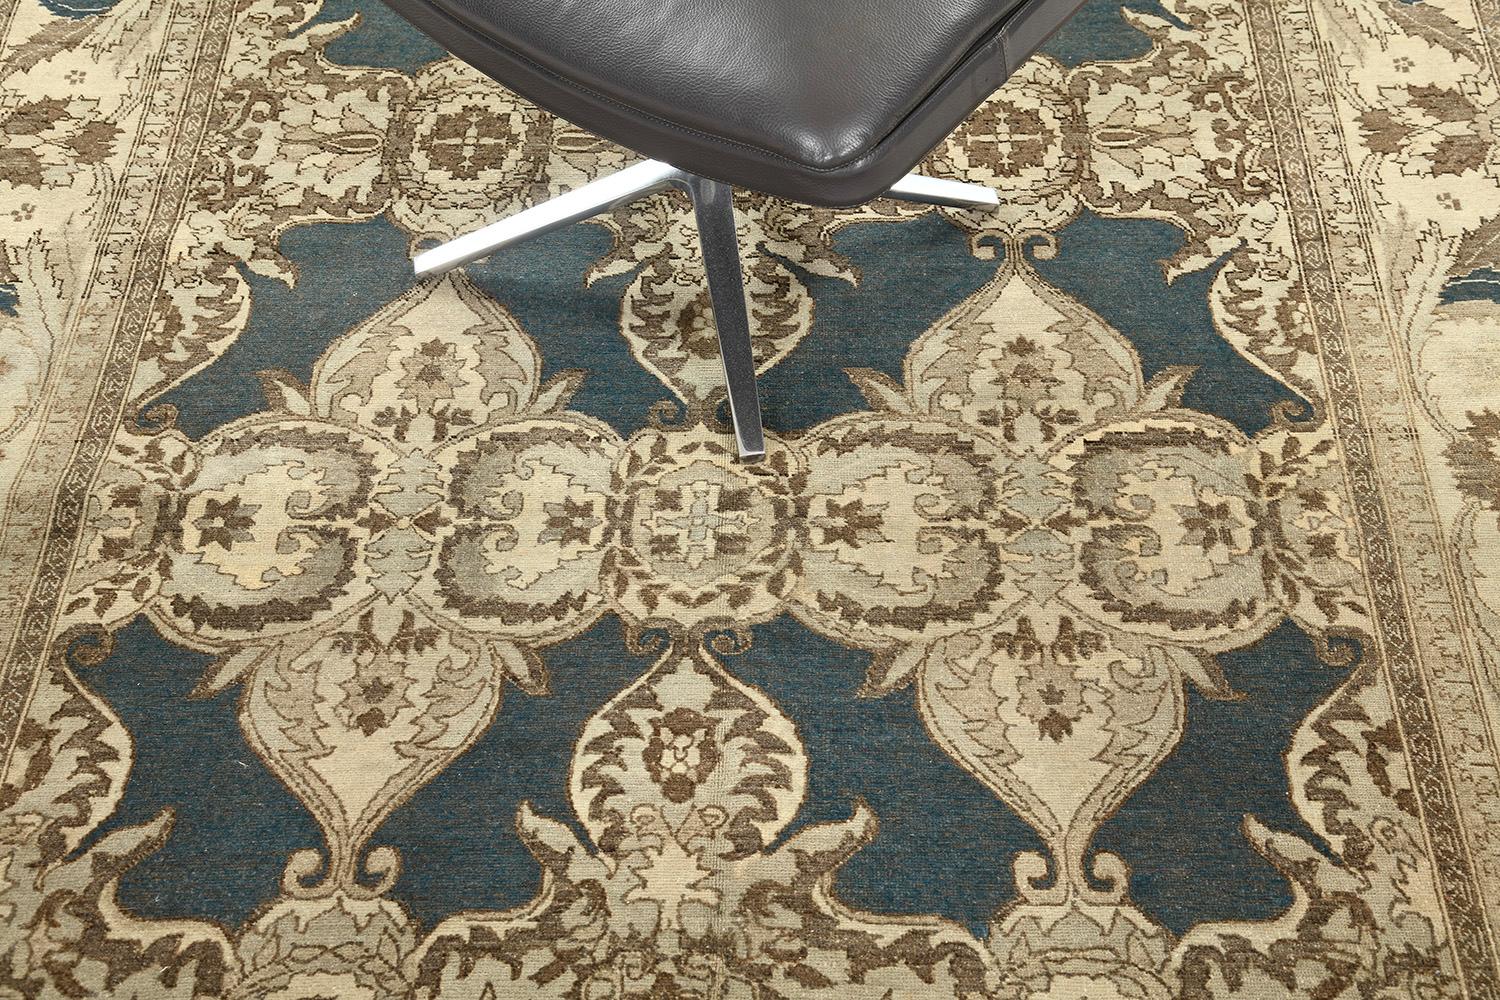 An amazing revival of Arts and Crafts Style rug that features elegant neutral tones. Fabricating gracefully in an opaque midnight blue field, the mirrored pattern is well-coordinated and matches the theme. Ornamental embellishments are formed